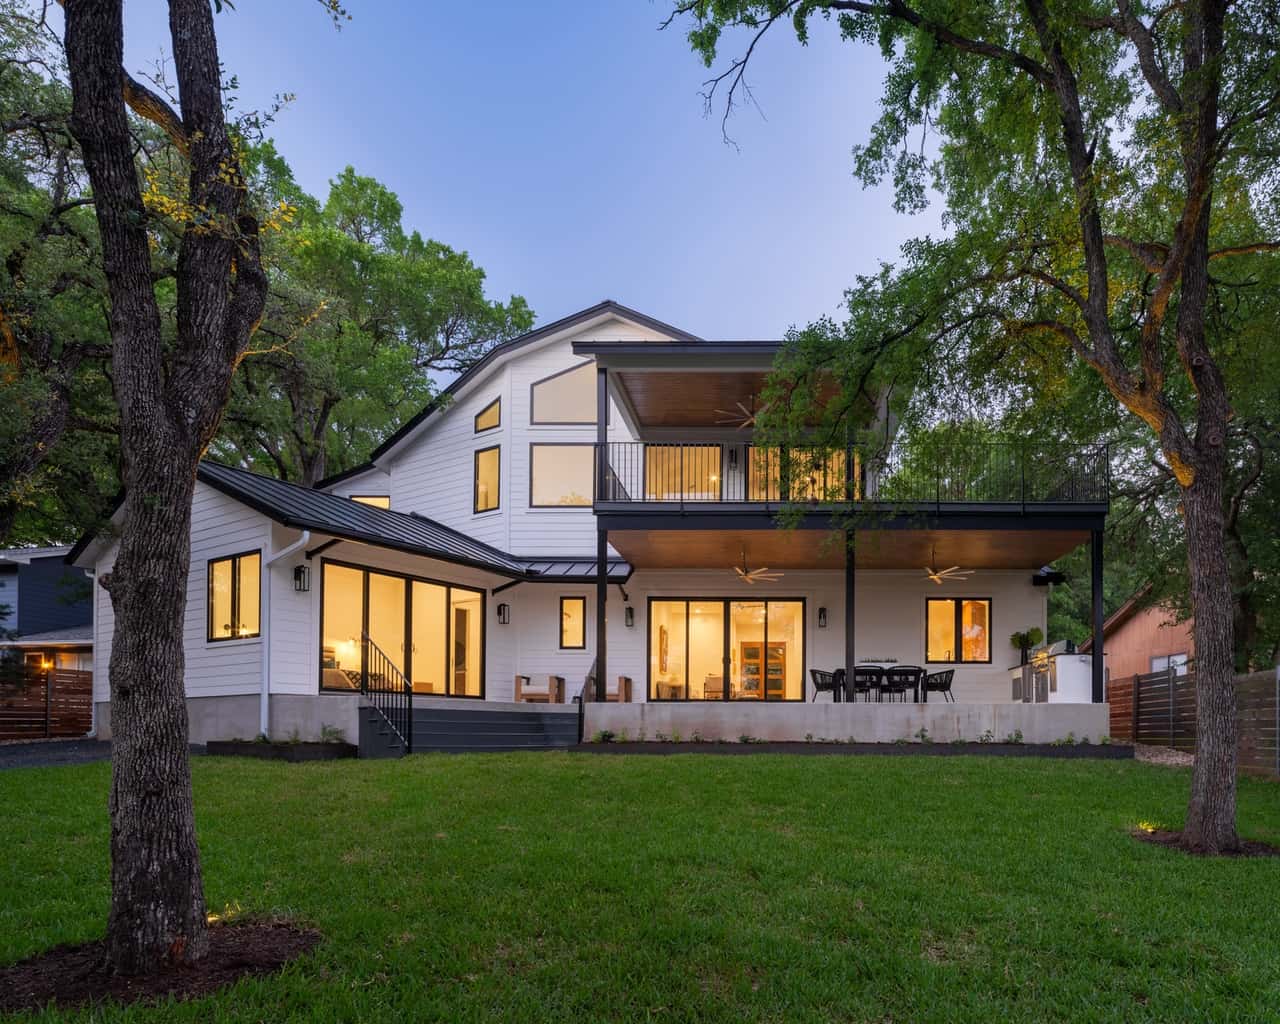 | The House of 7 Gables - Barton Hills | Full Home Remodel | m home builders austin